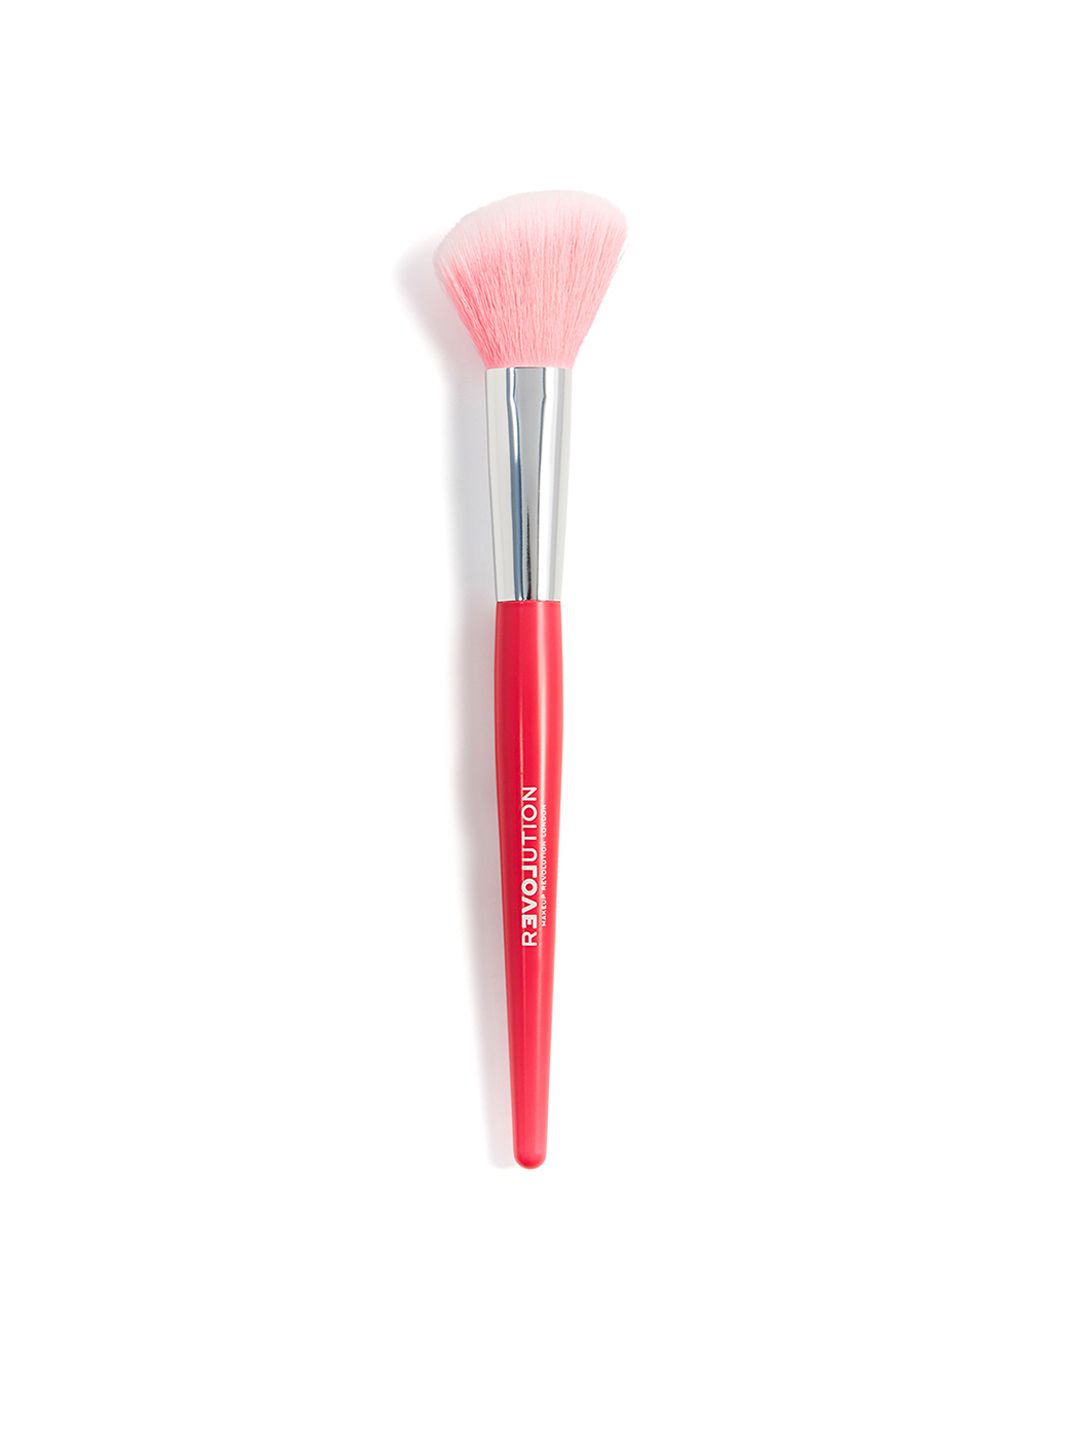 Makeup Revolution London Brush Queen Face Angled Powder Brush Price in India